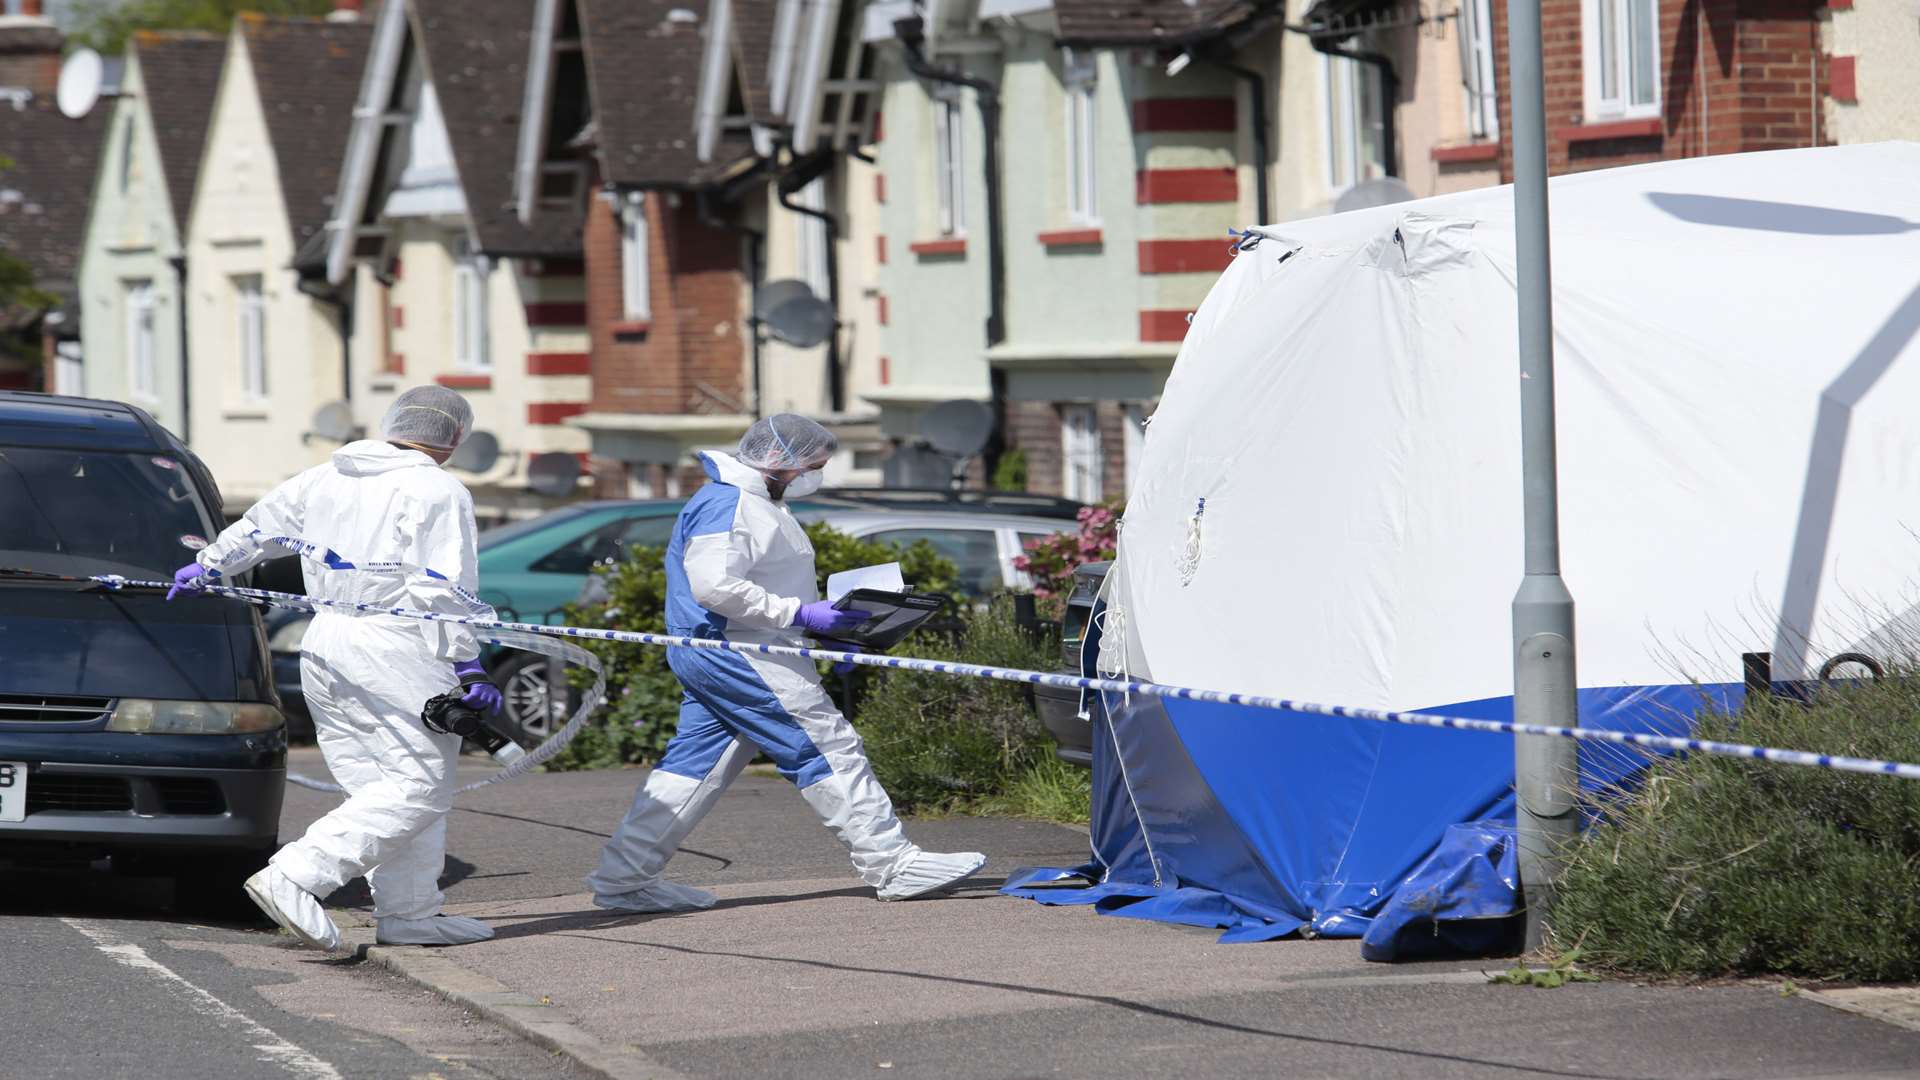 Forensic officers have been on scene all morning. Picture: Martin Apps